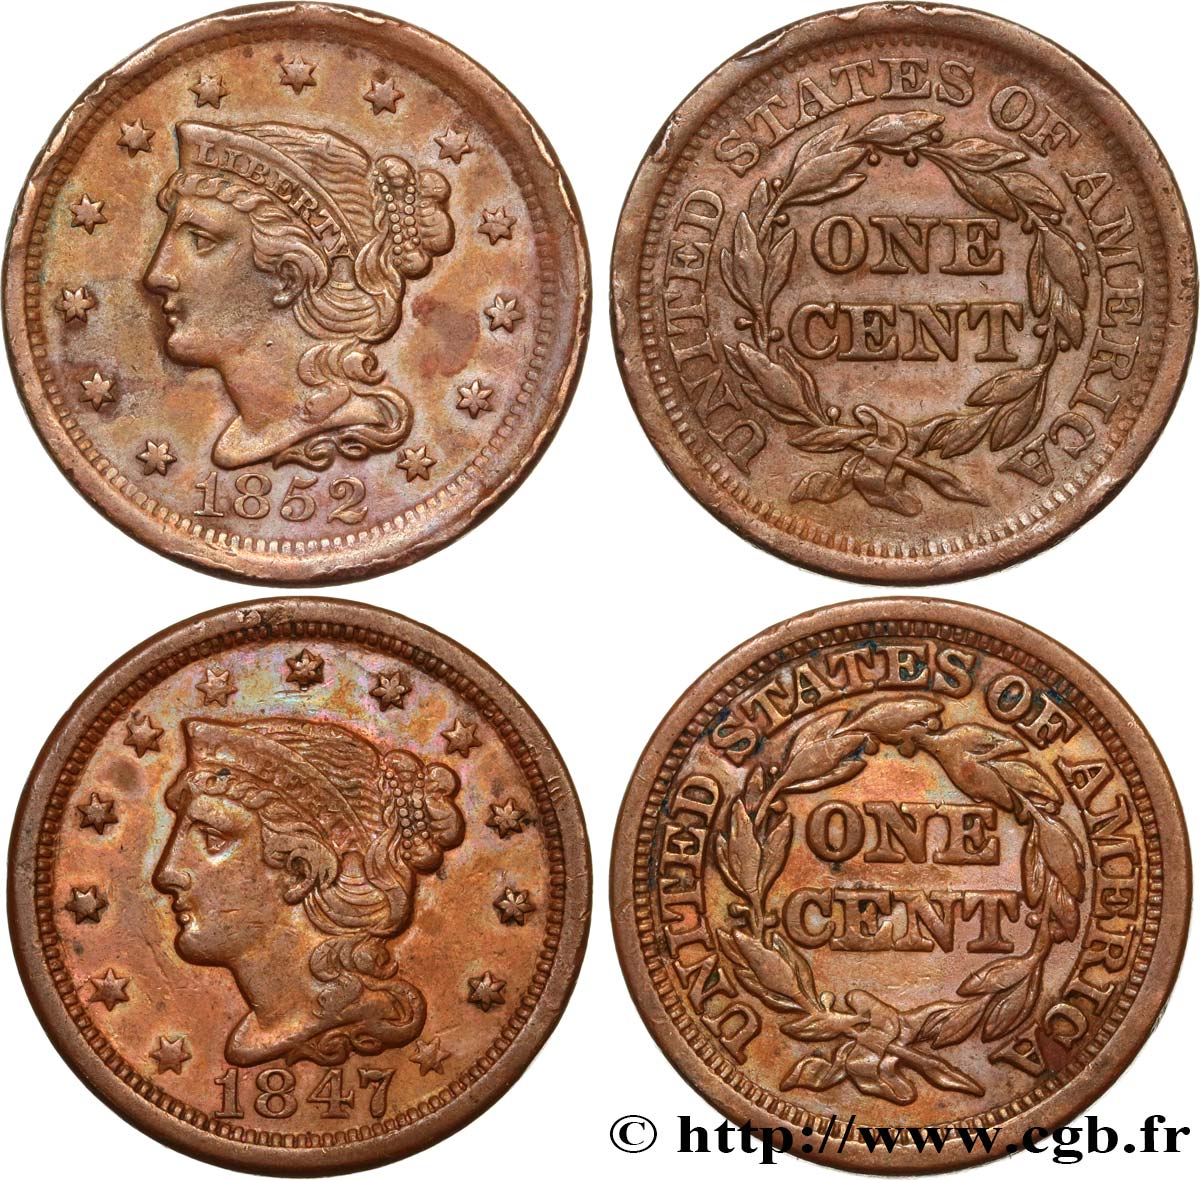 UNITED STATES OF AMERICA Lot de 2 “One Cent Braided Hair” 1847,1852 Philadelphie AU 